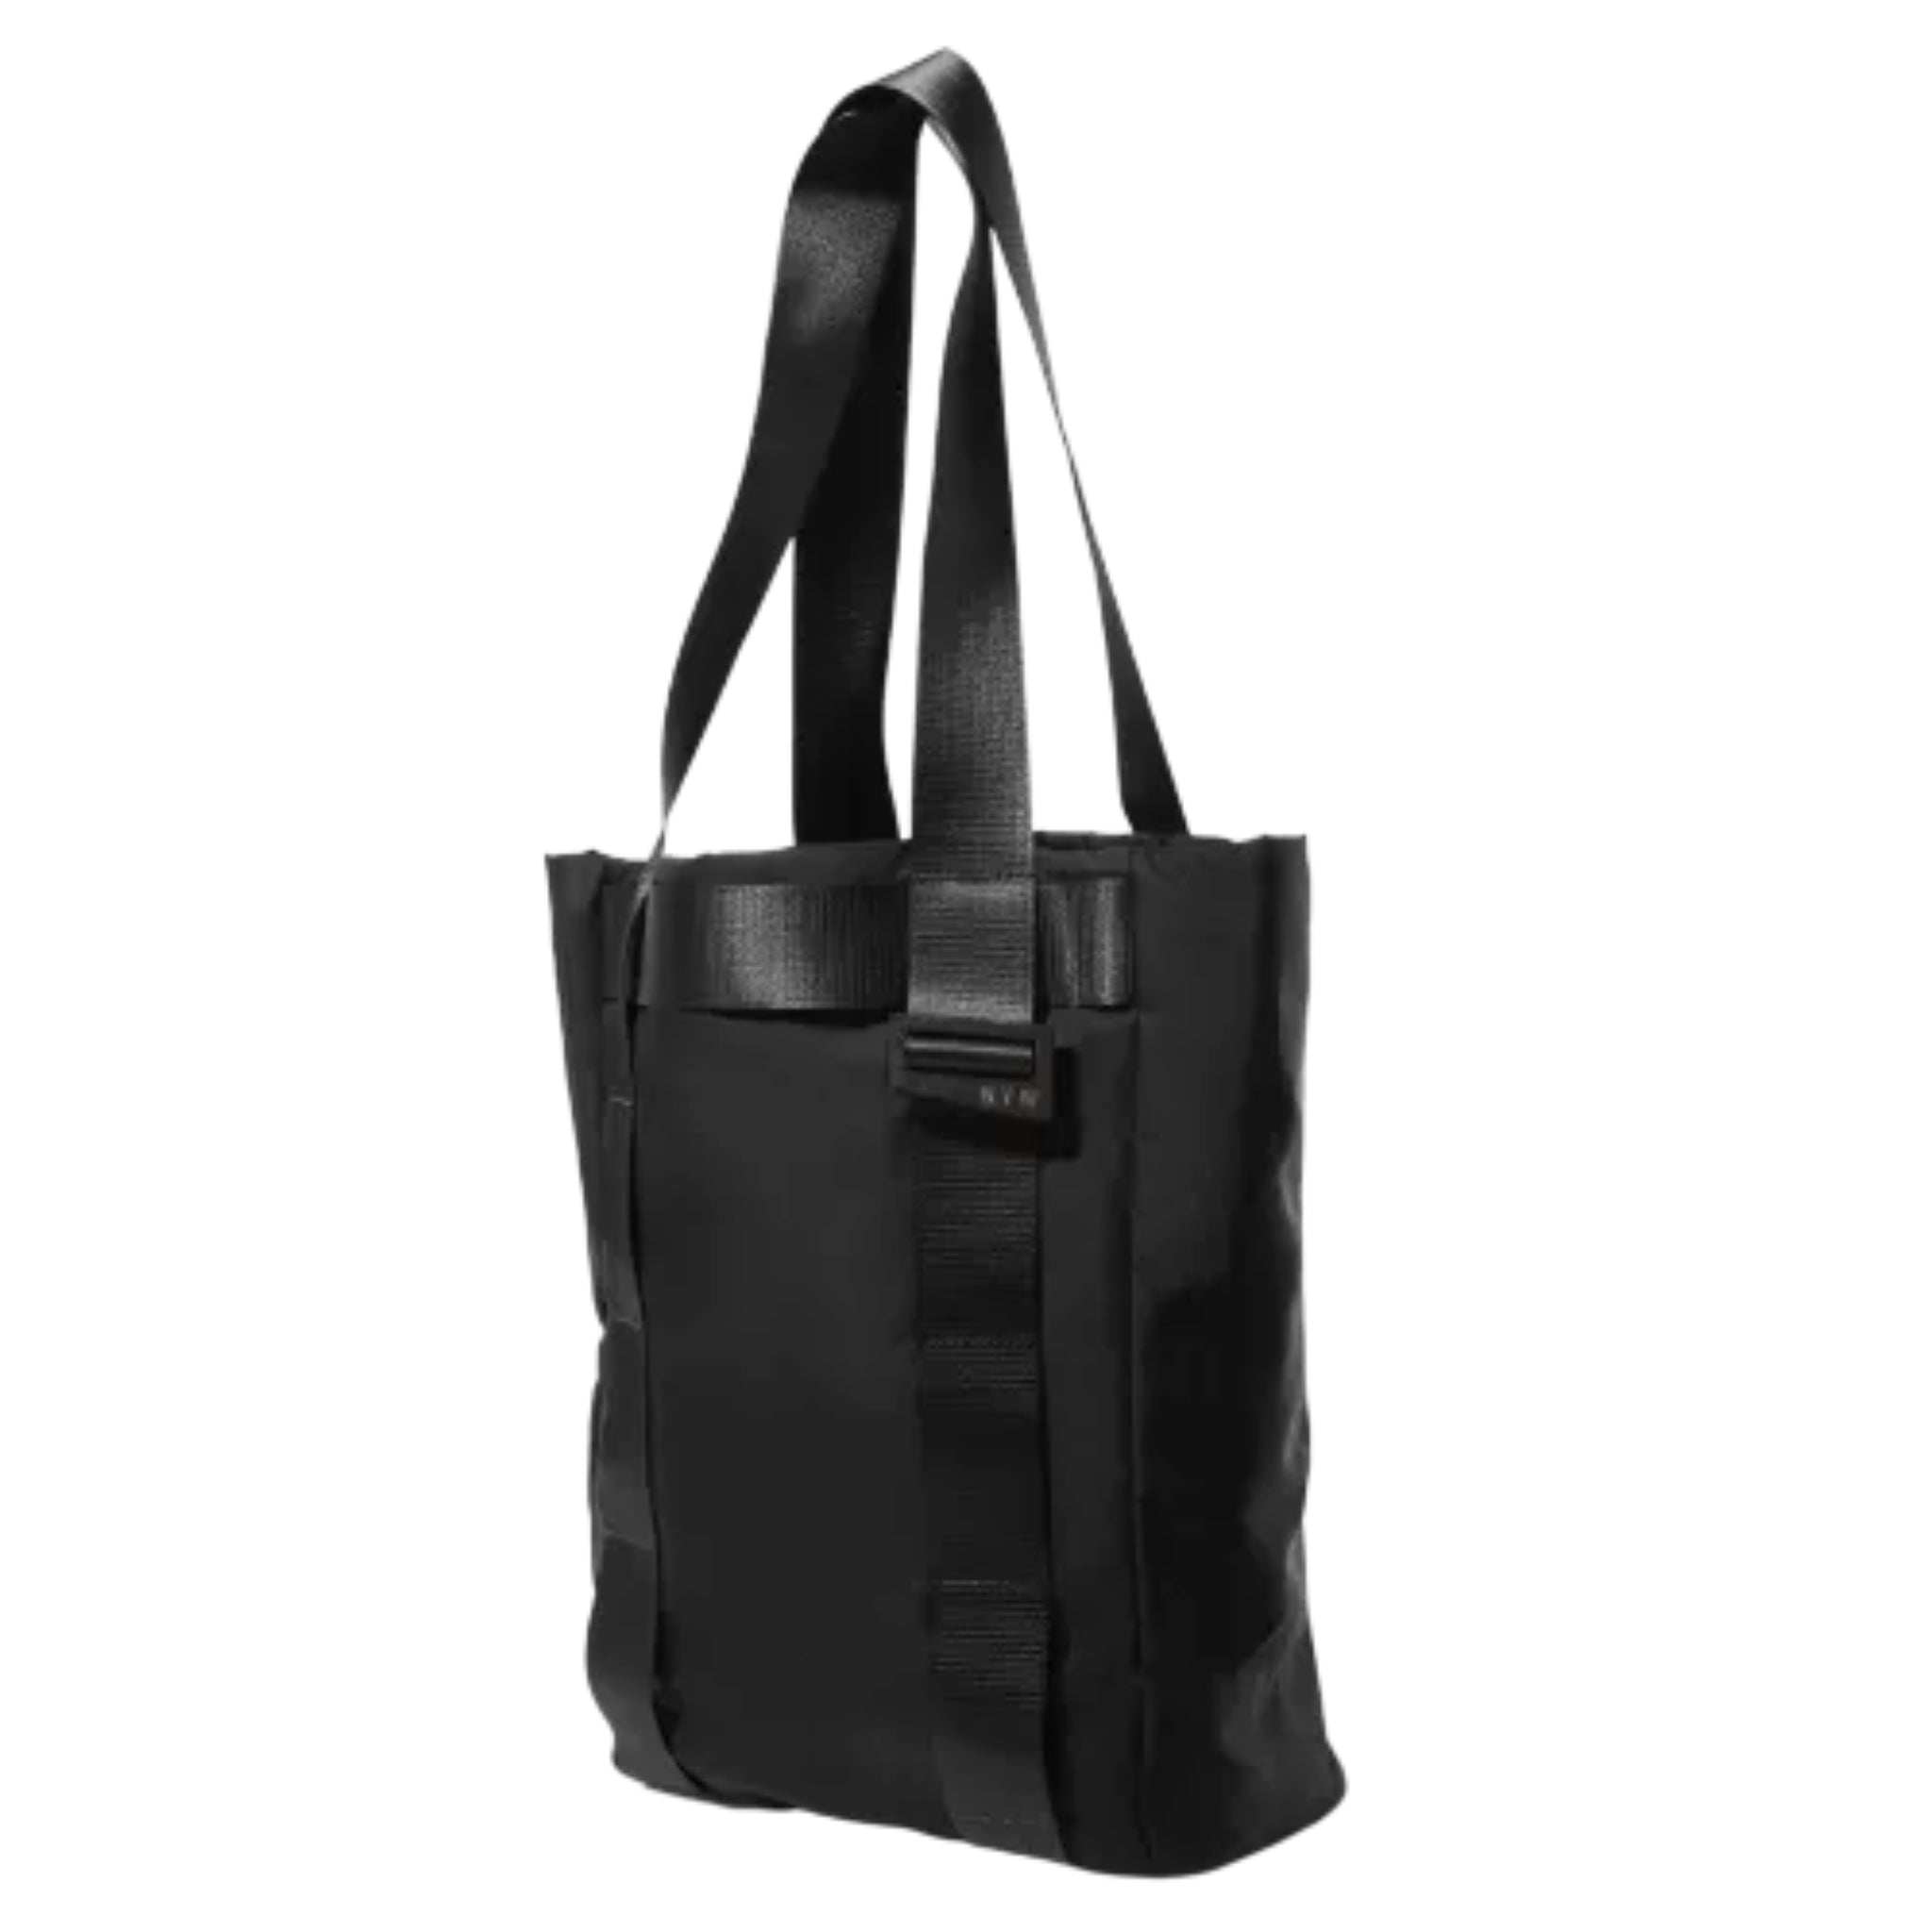 Picture showing off the side of the medium sized Black tote bag, utilitarian style. On a white background.